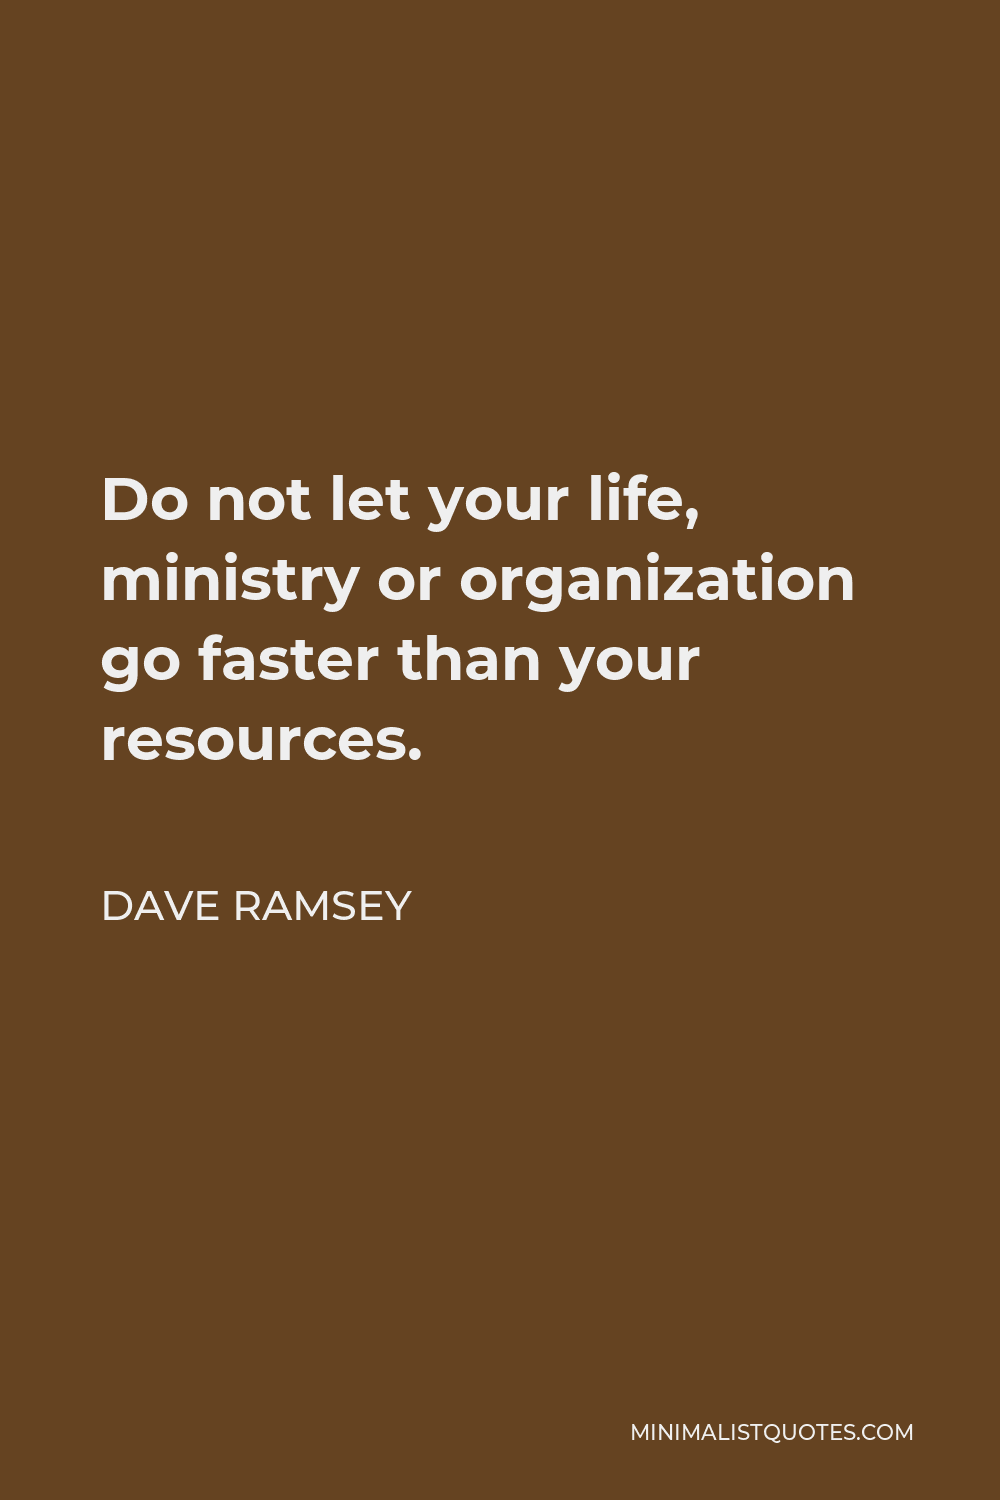 Dave Ramsey Quote - Do not let your life, ministry or organization go faster than your resources.